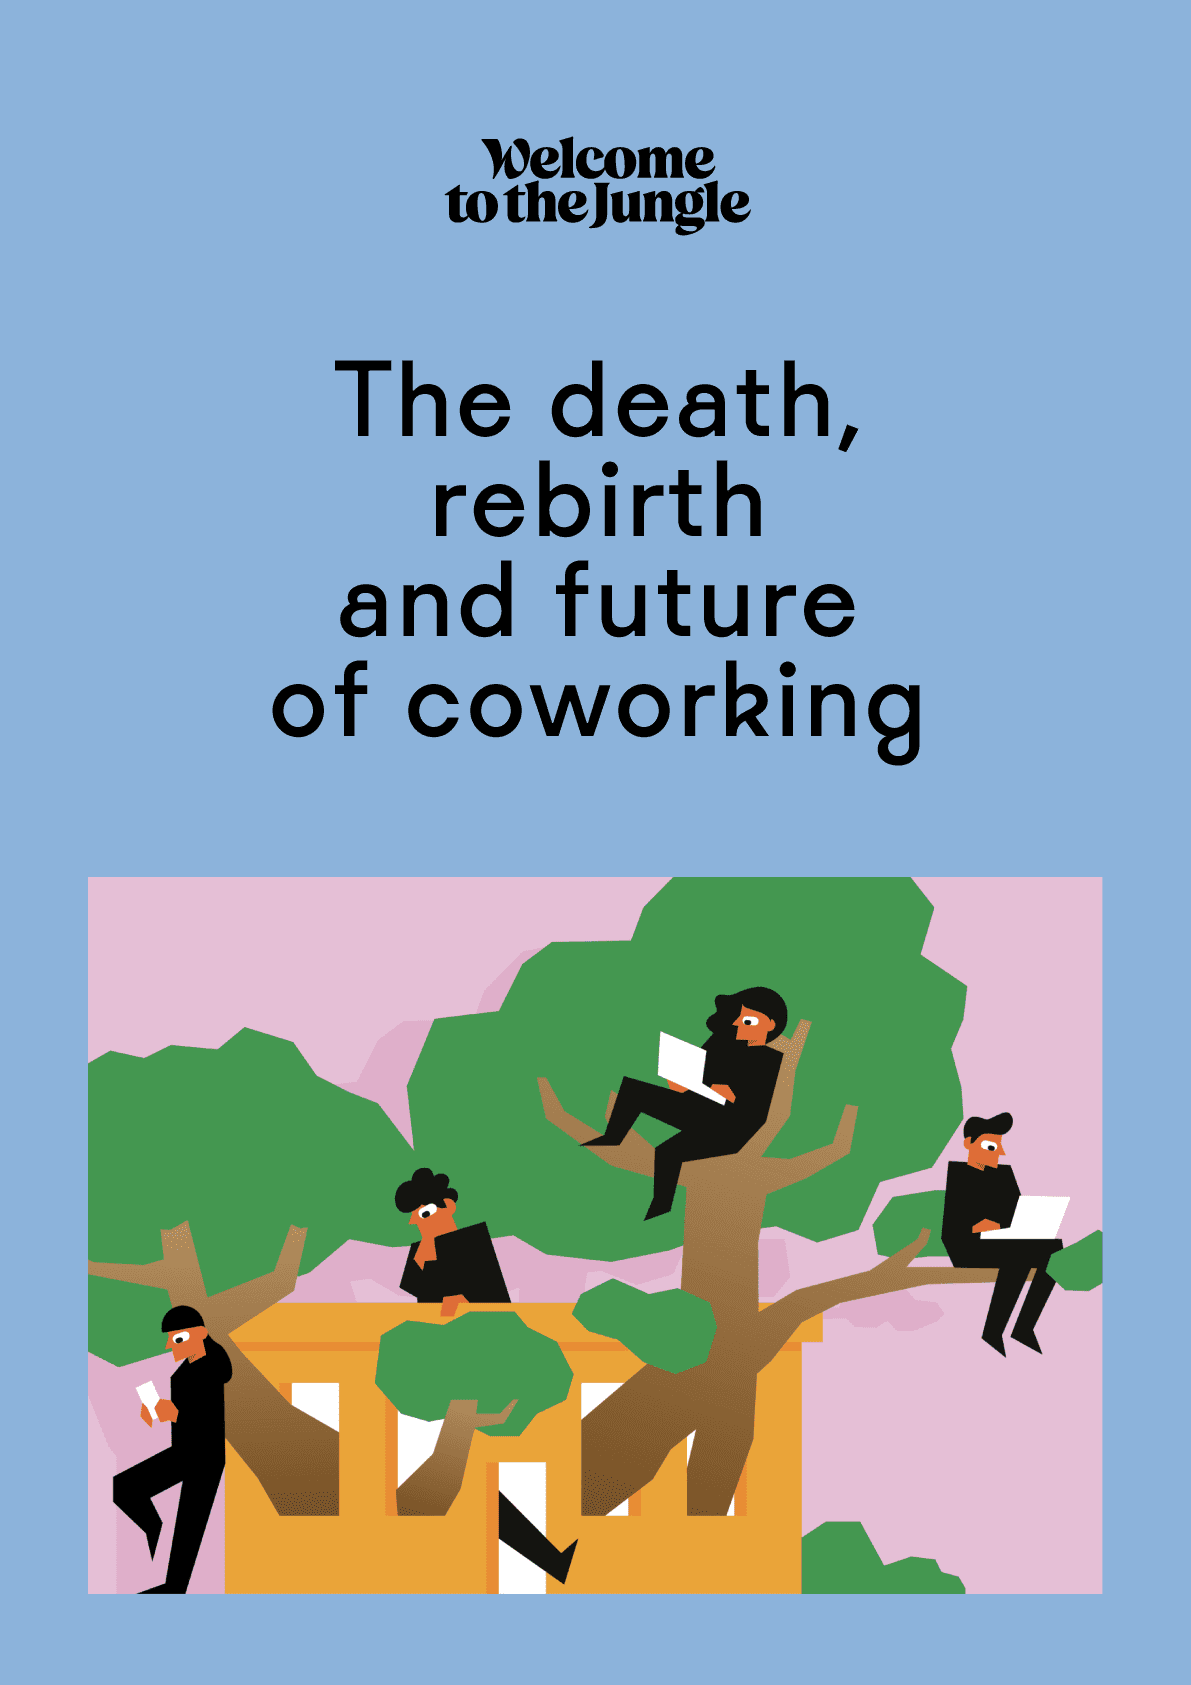 The death, rebirth and future of coworking